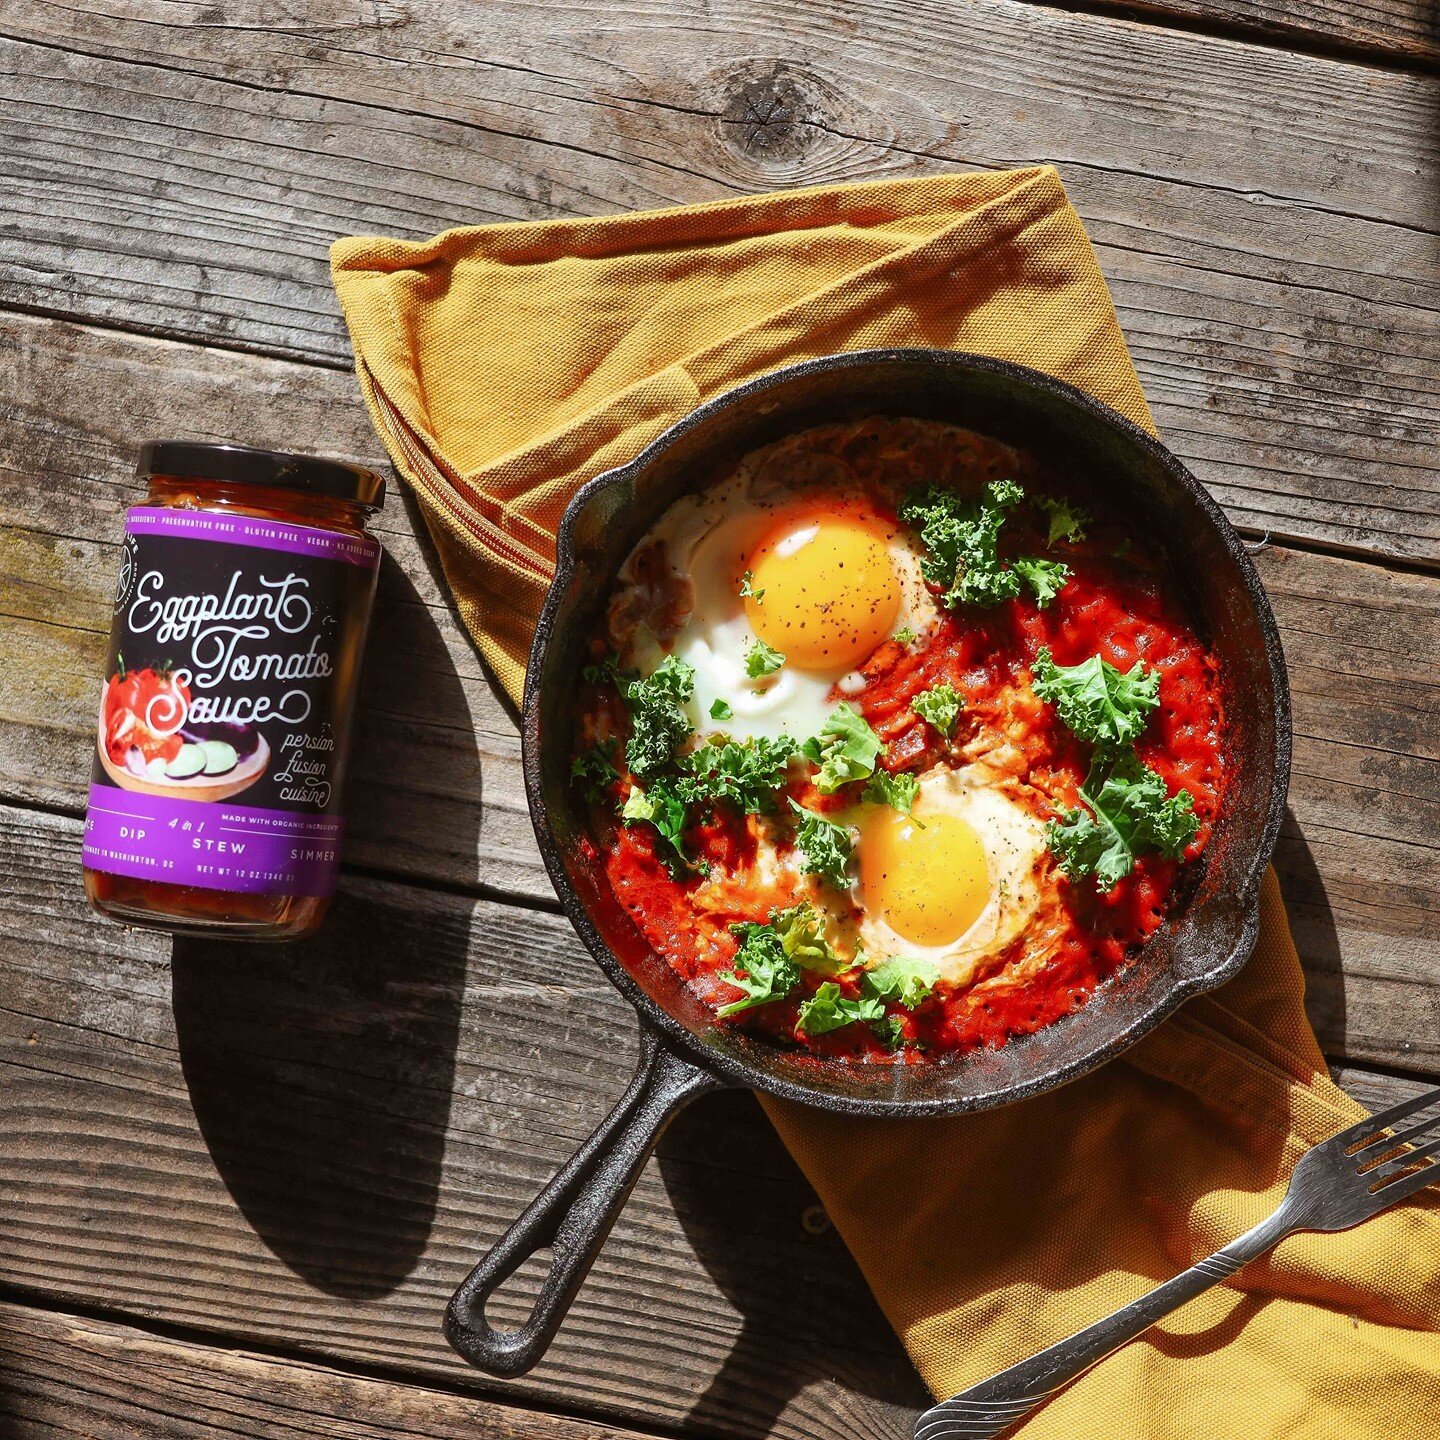 Treat yourself this weekend: Fried eggs in @enjoyspiceoflife Eggplant Tomato Sauce, chopped parsley, shaved Parmesan, and some Red paper flakes. So easy, yet absolutely delicious. 

* 
* 
* 
* 
* 
#spiceoflife #cooking #glutenfree #glutenfreerecipes 